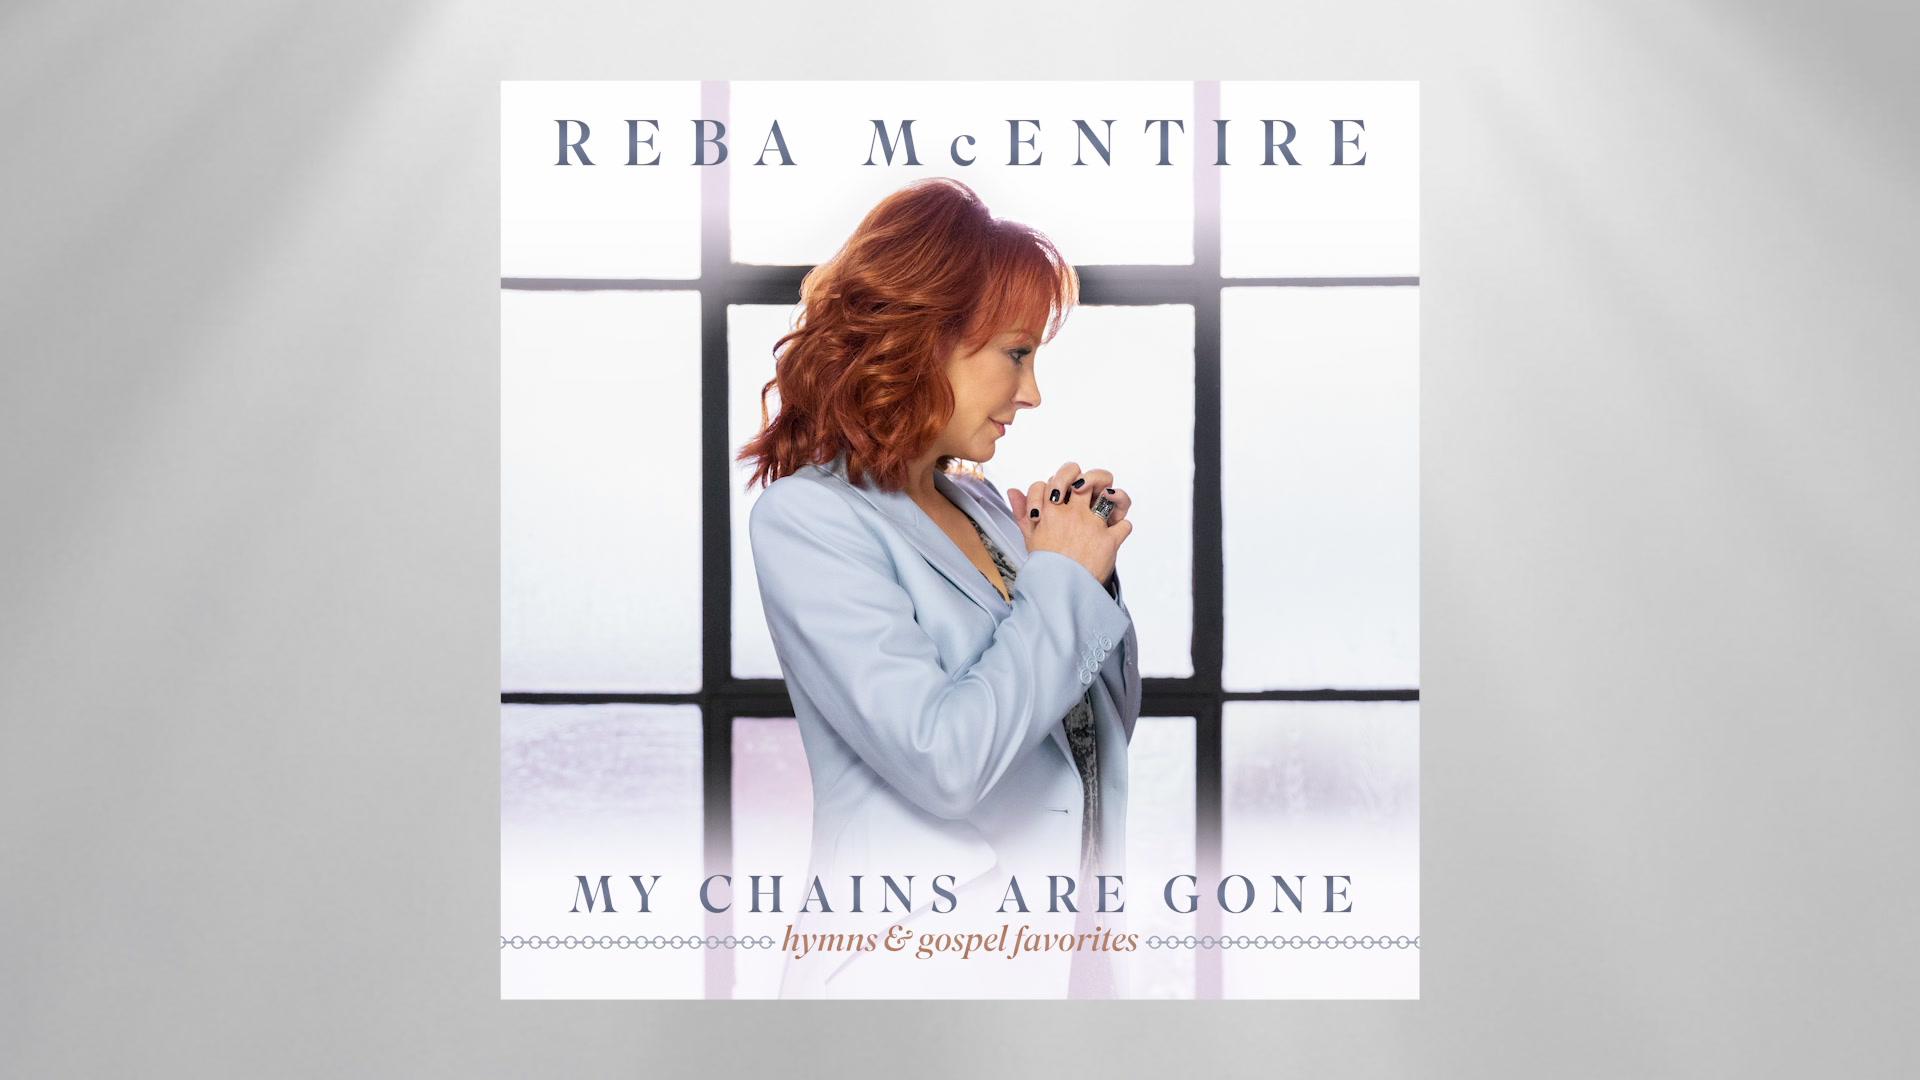 Reba McEntire - Softly And Tenderly (Audio)